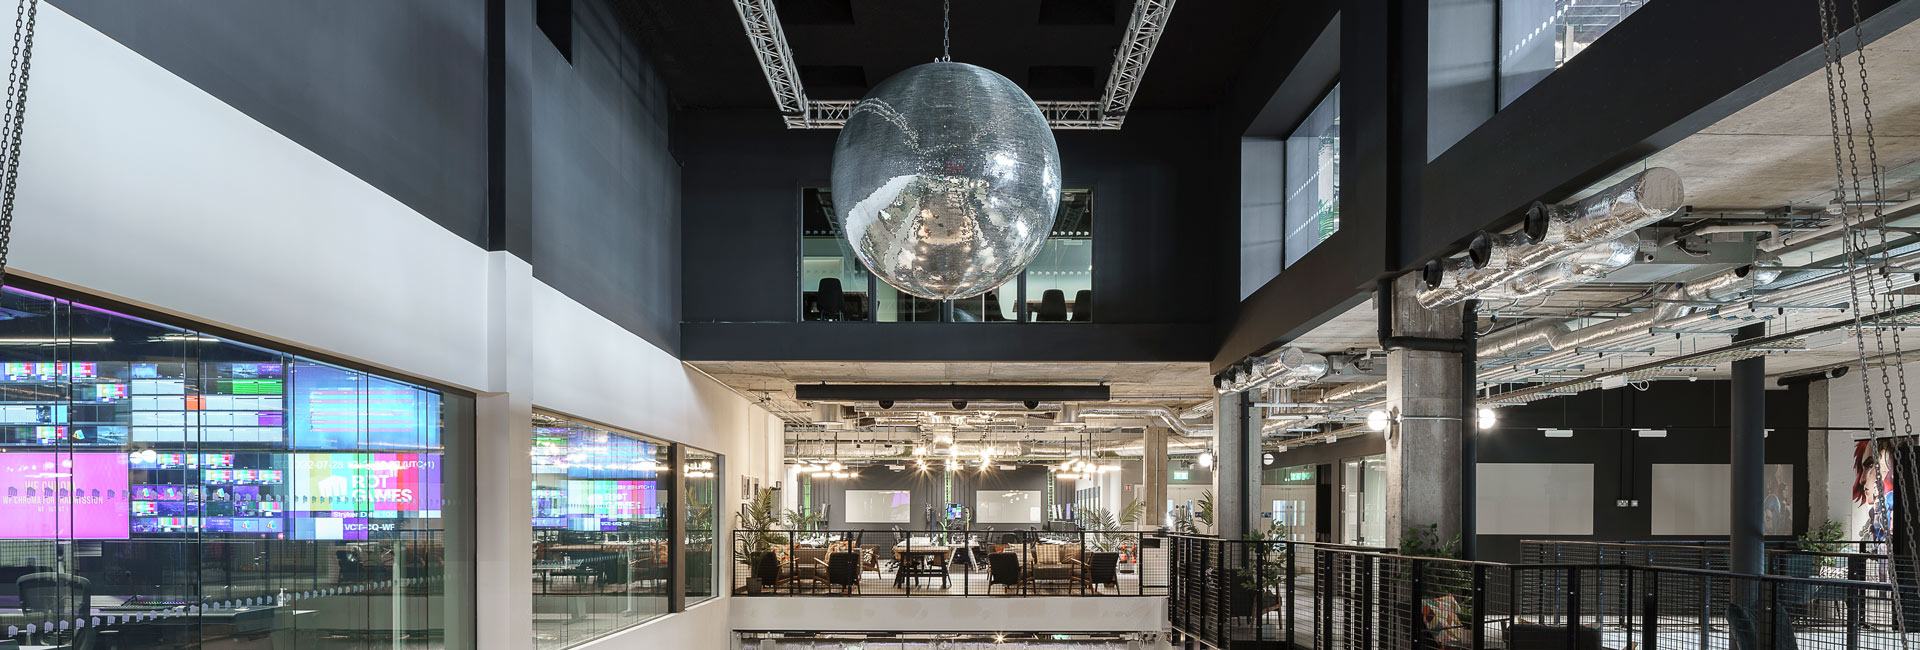 The atrium of the Riot Games building with a large disco ball hanging overhead.